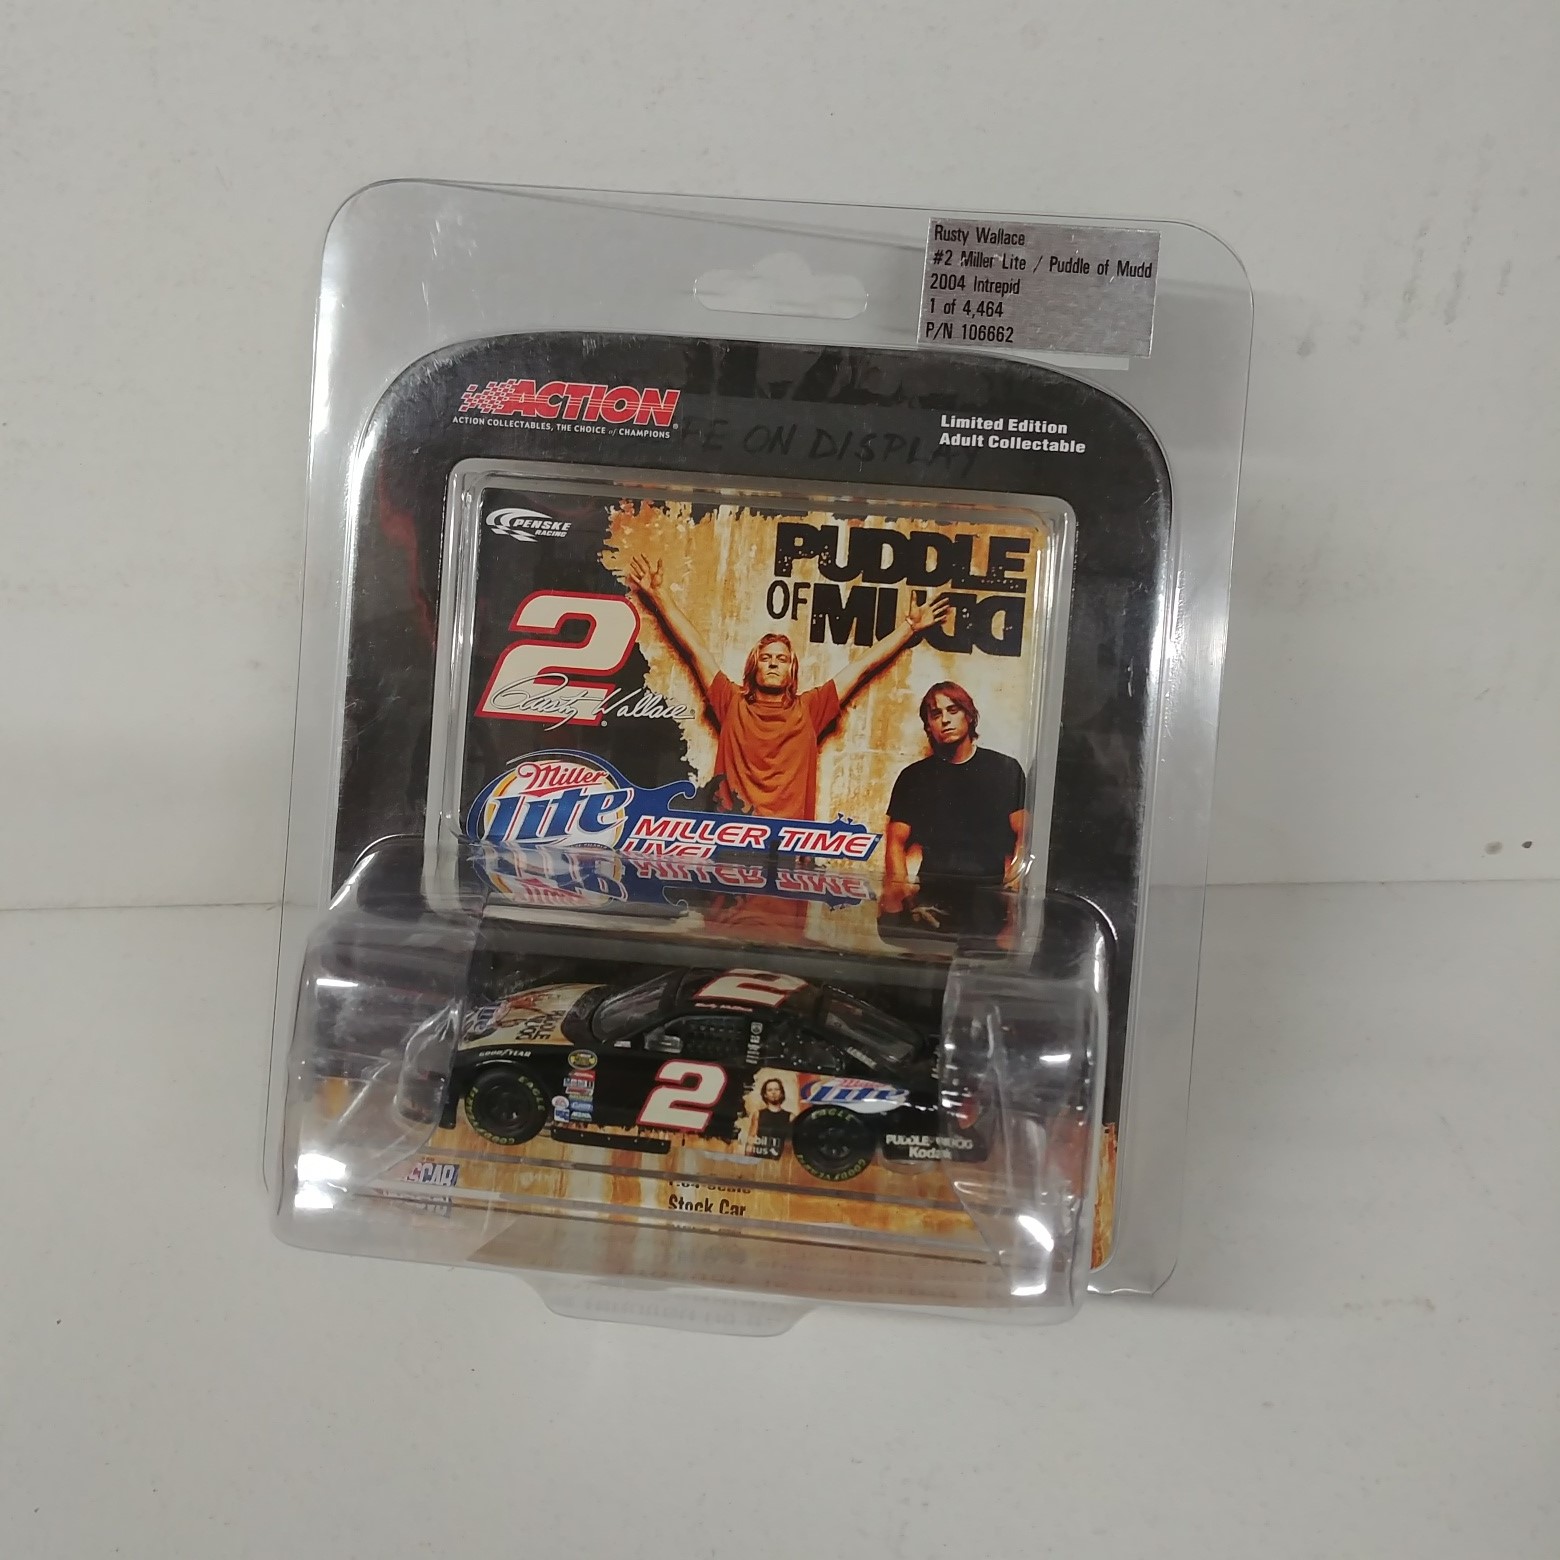 2004 Rusty Wallace 1/64th Miller Lite "Puddle of Mud" car